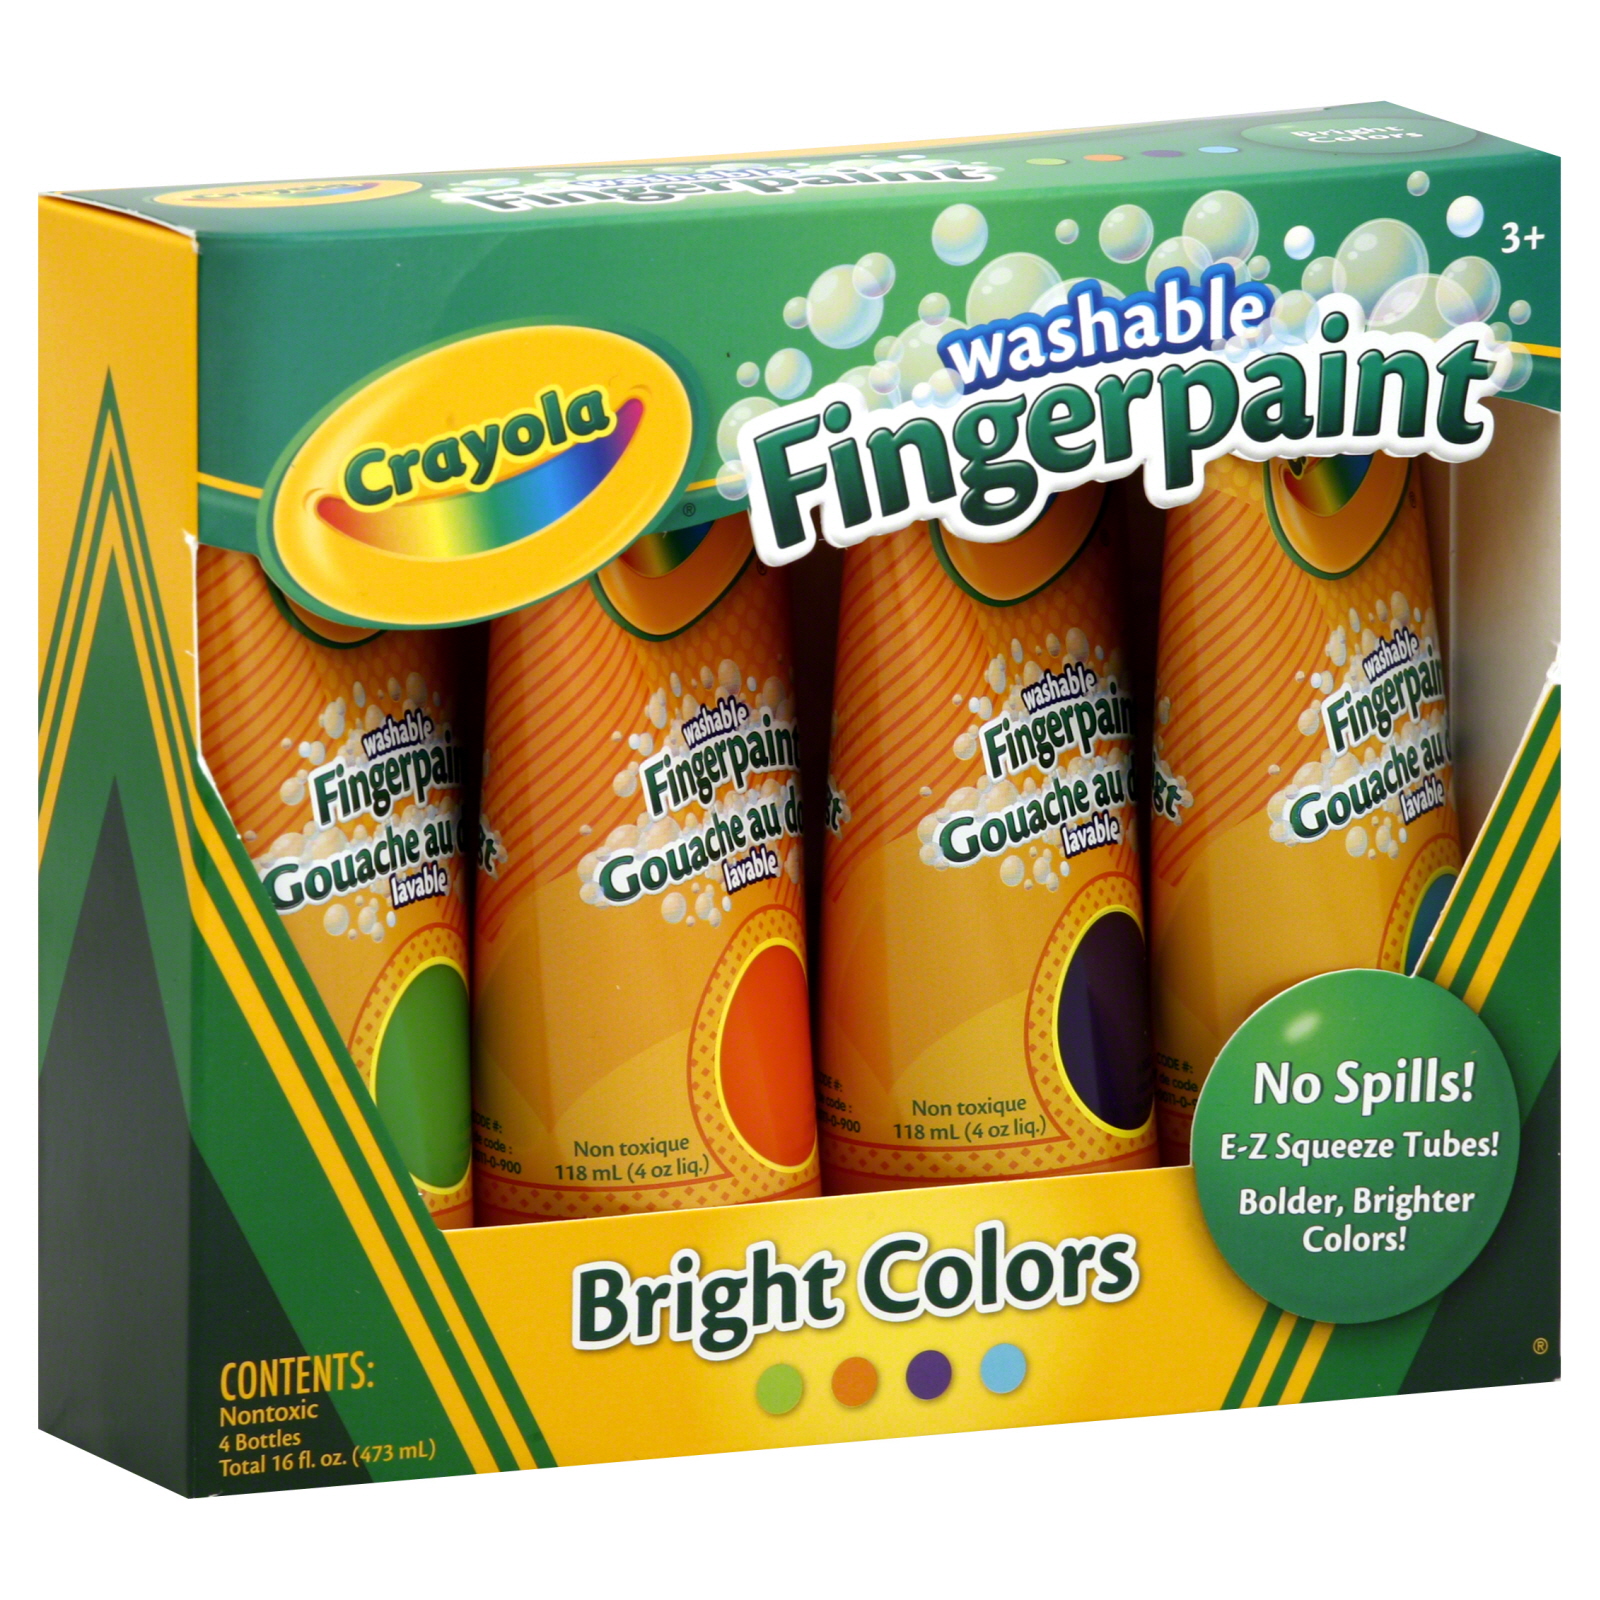 Crayola Washable Finger Paint - 4 ounces - Set of 4 - Assorted Bright Colors